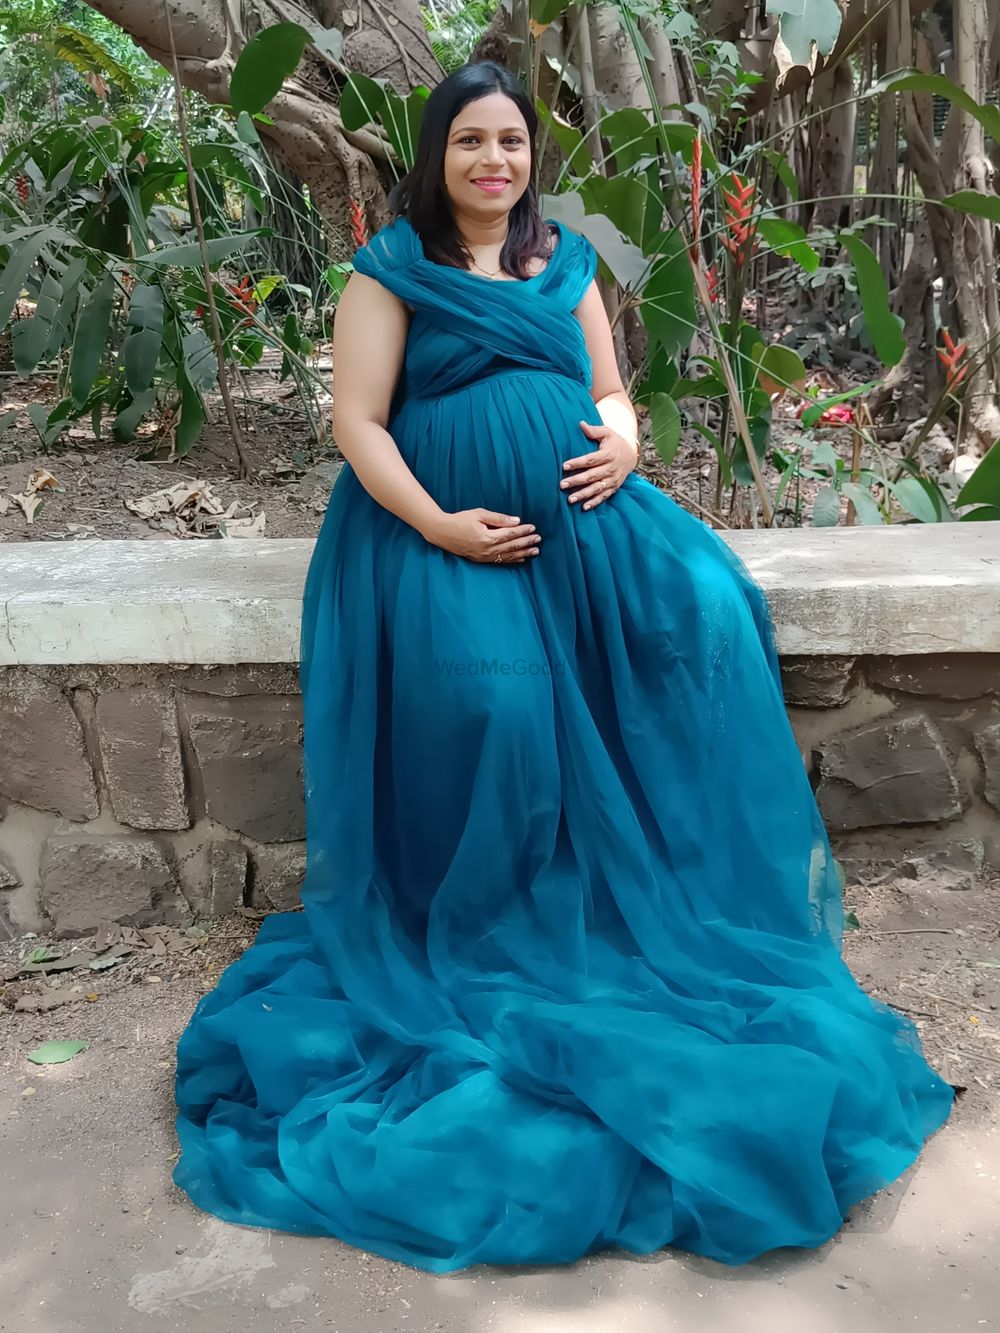 Photo From Baby Shower - By Sayli Bhasme